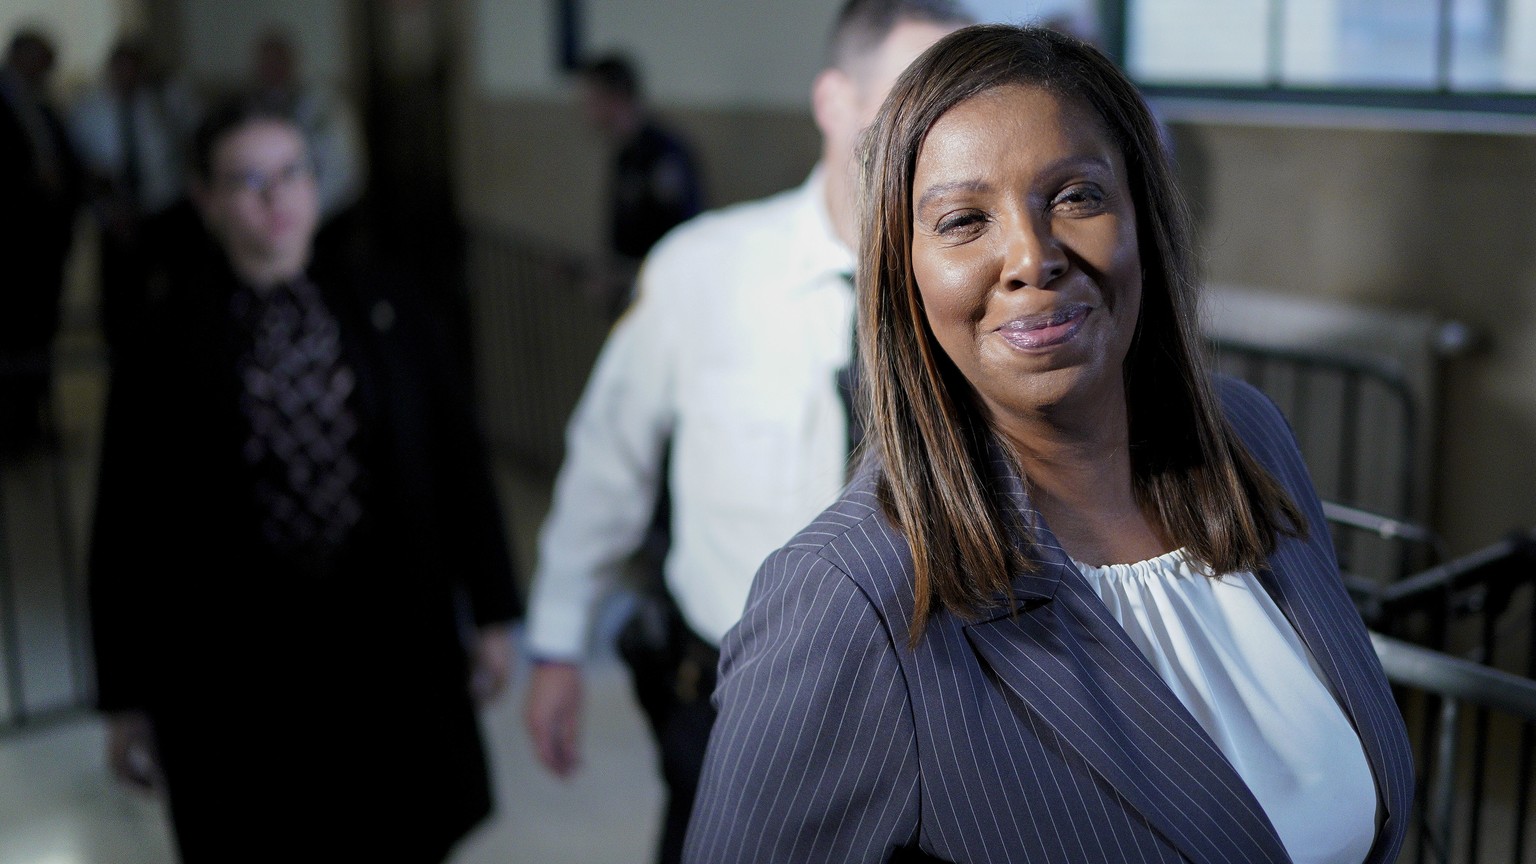 New York Attorney General Letitia James walks out of the courtroom during a break in proceedings at New York Supreme Court, Monday, Nov. 6, 2023, in New York. (AP Photo/Eduardo Munoz Alvarez)